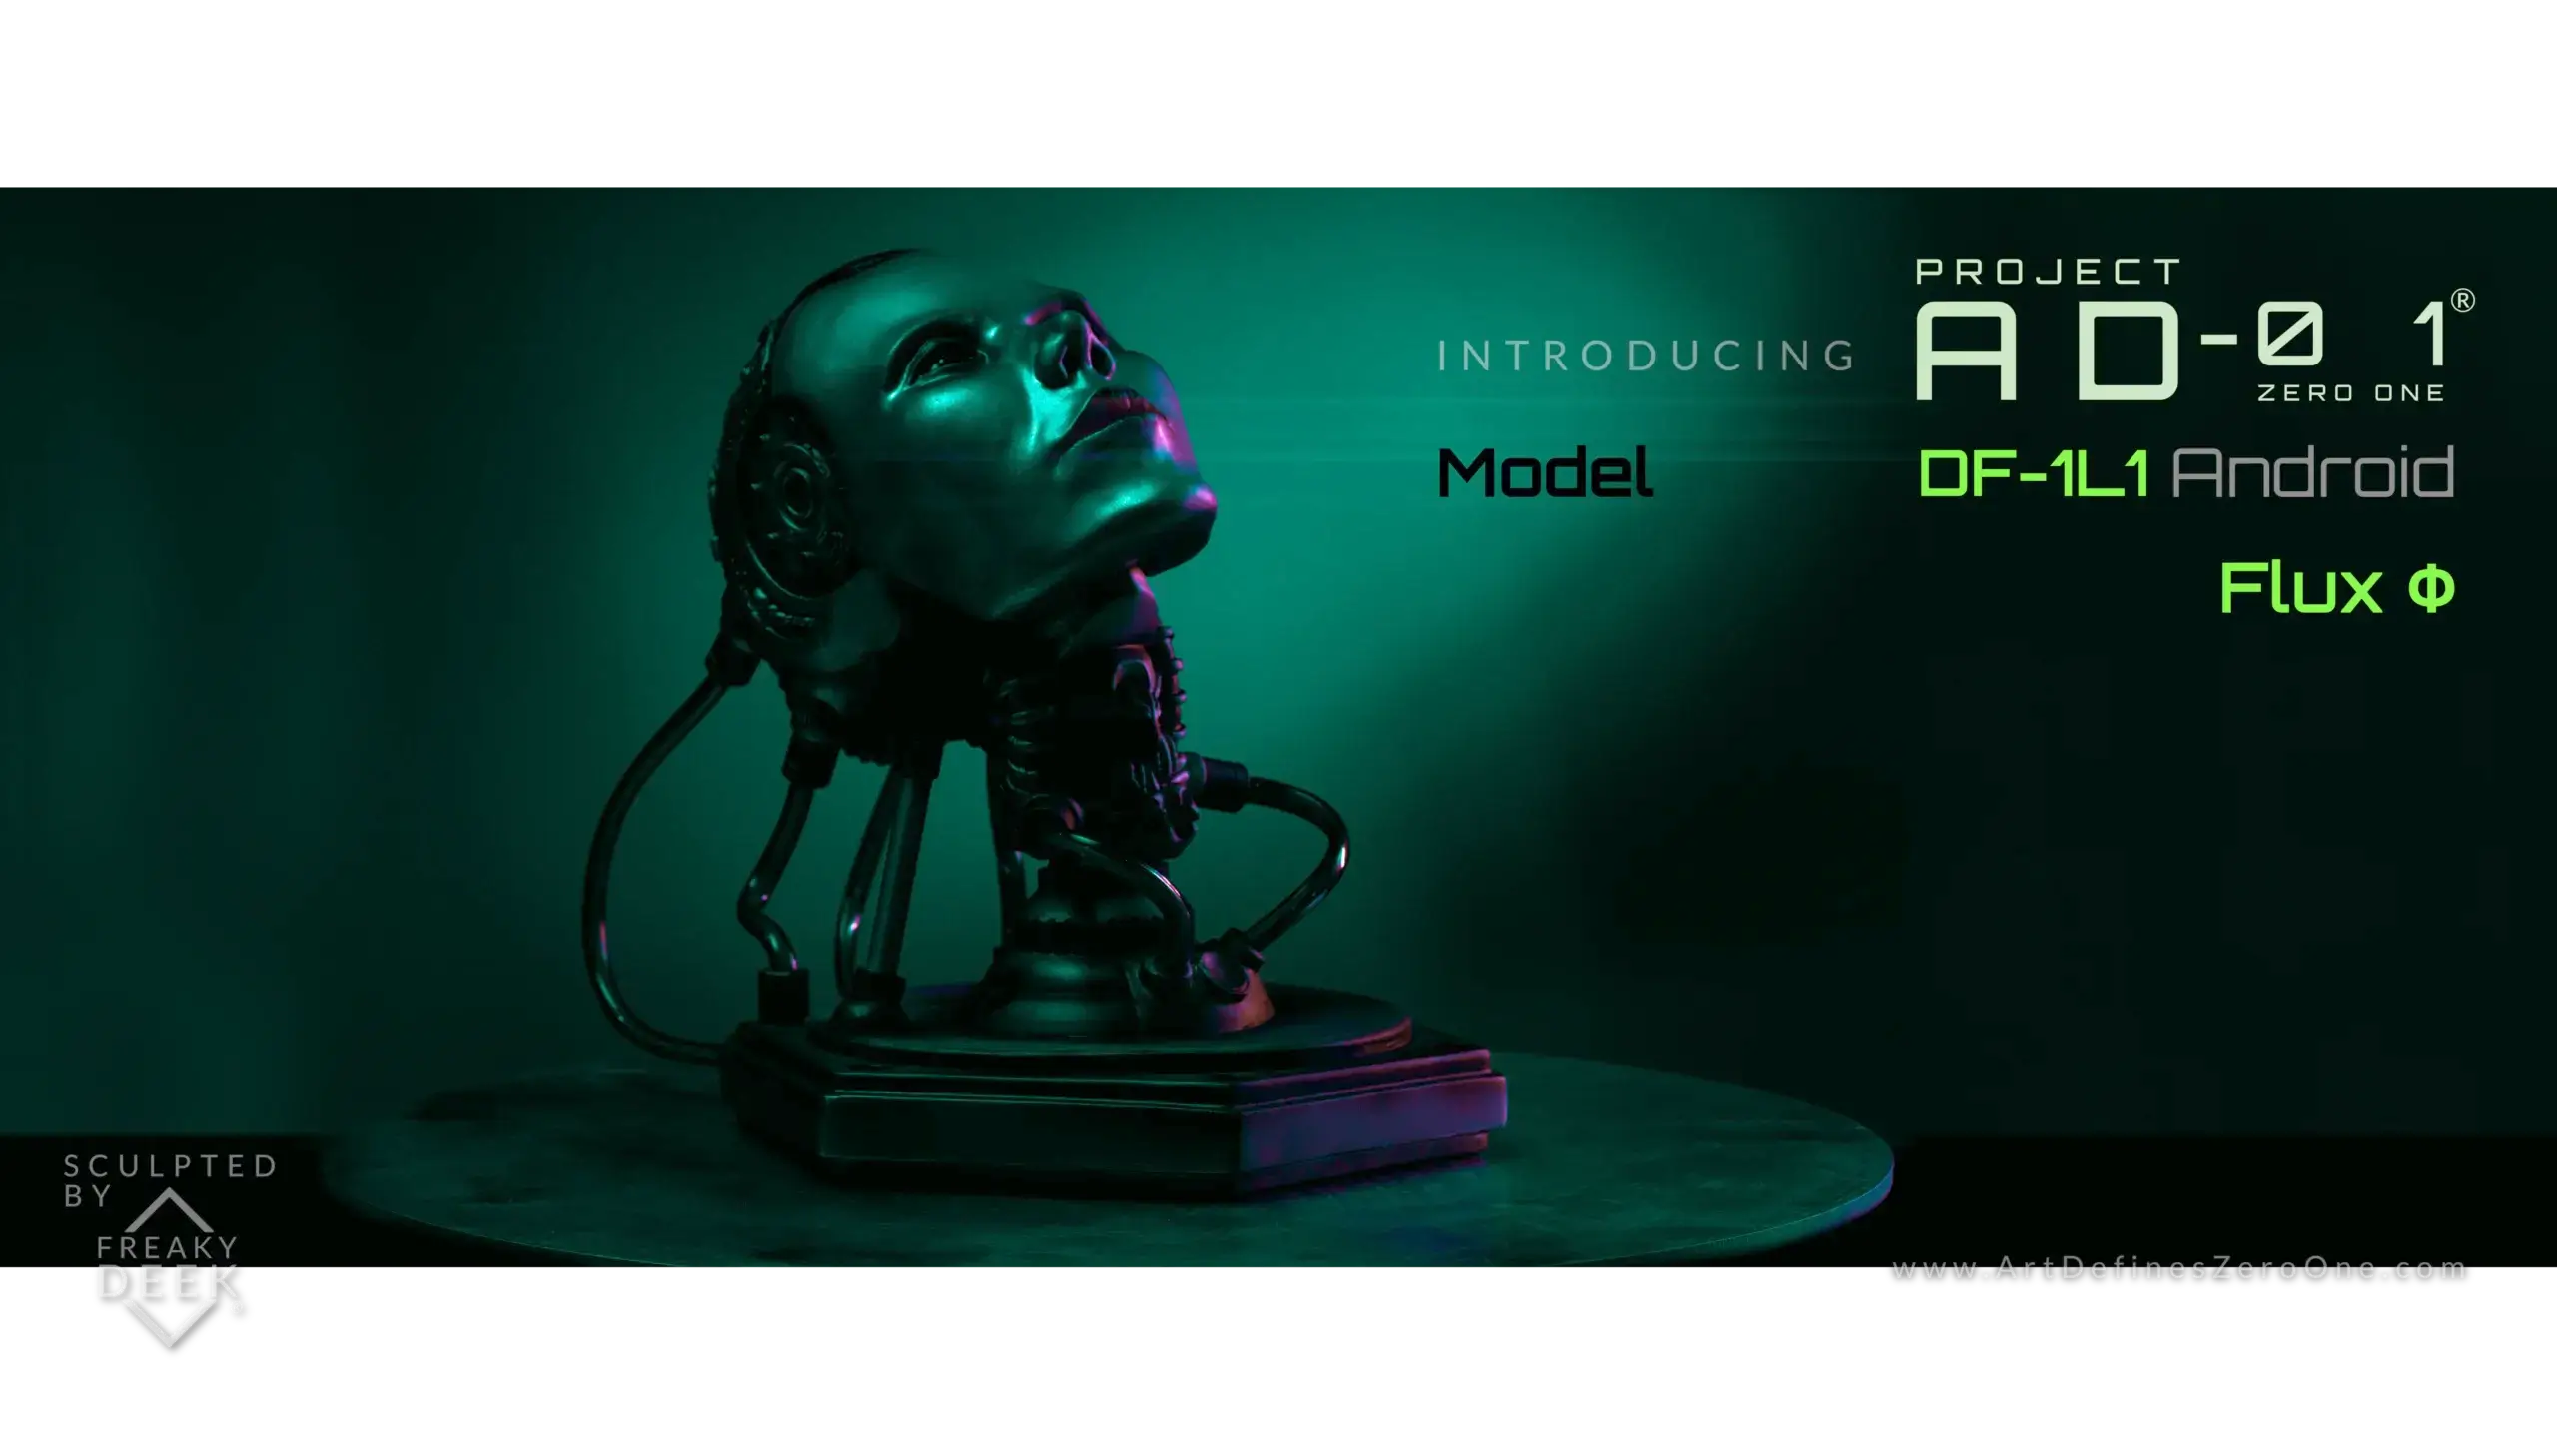 Project AD-01 handmade android green sculpture Flux front view